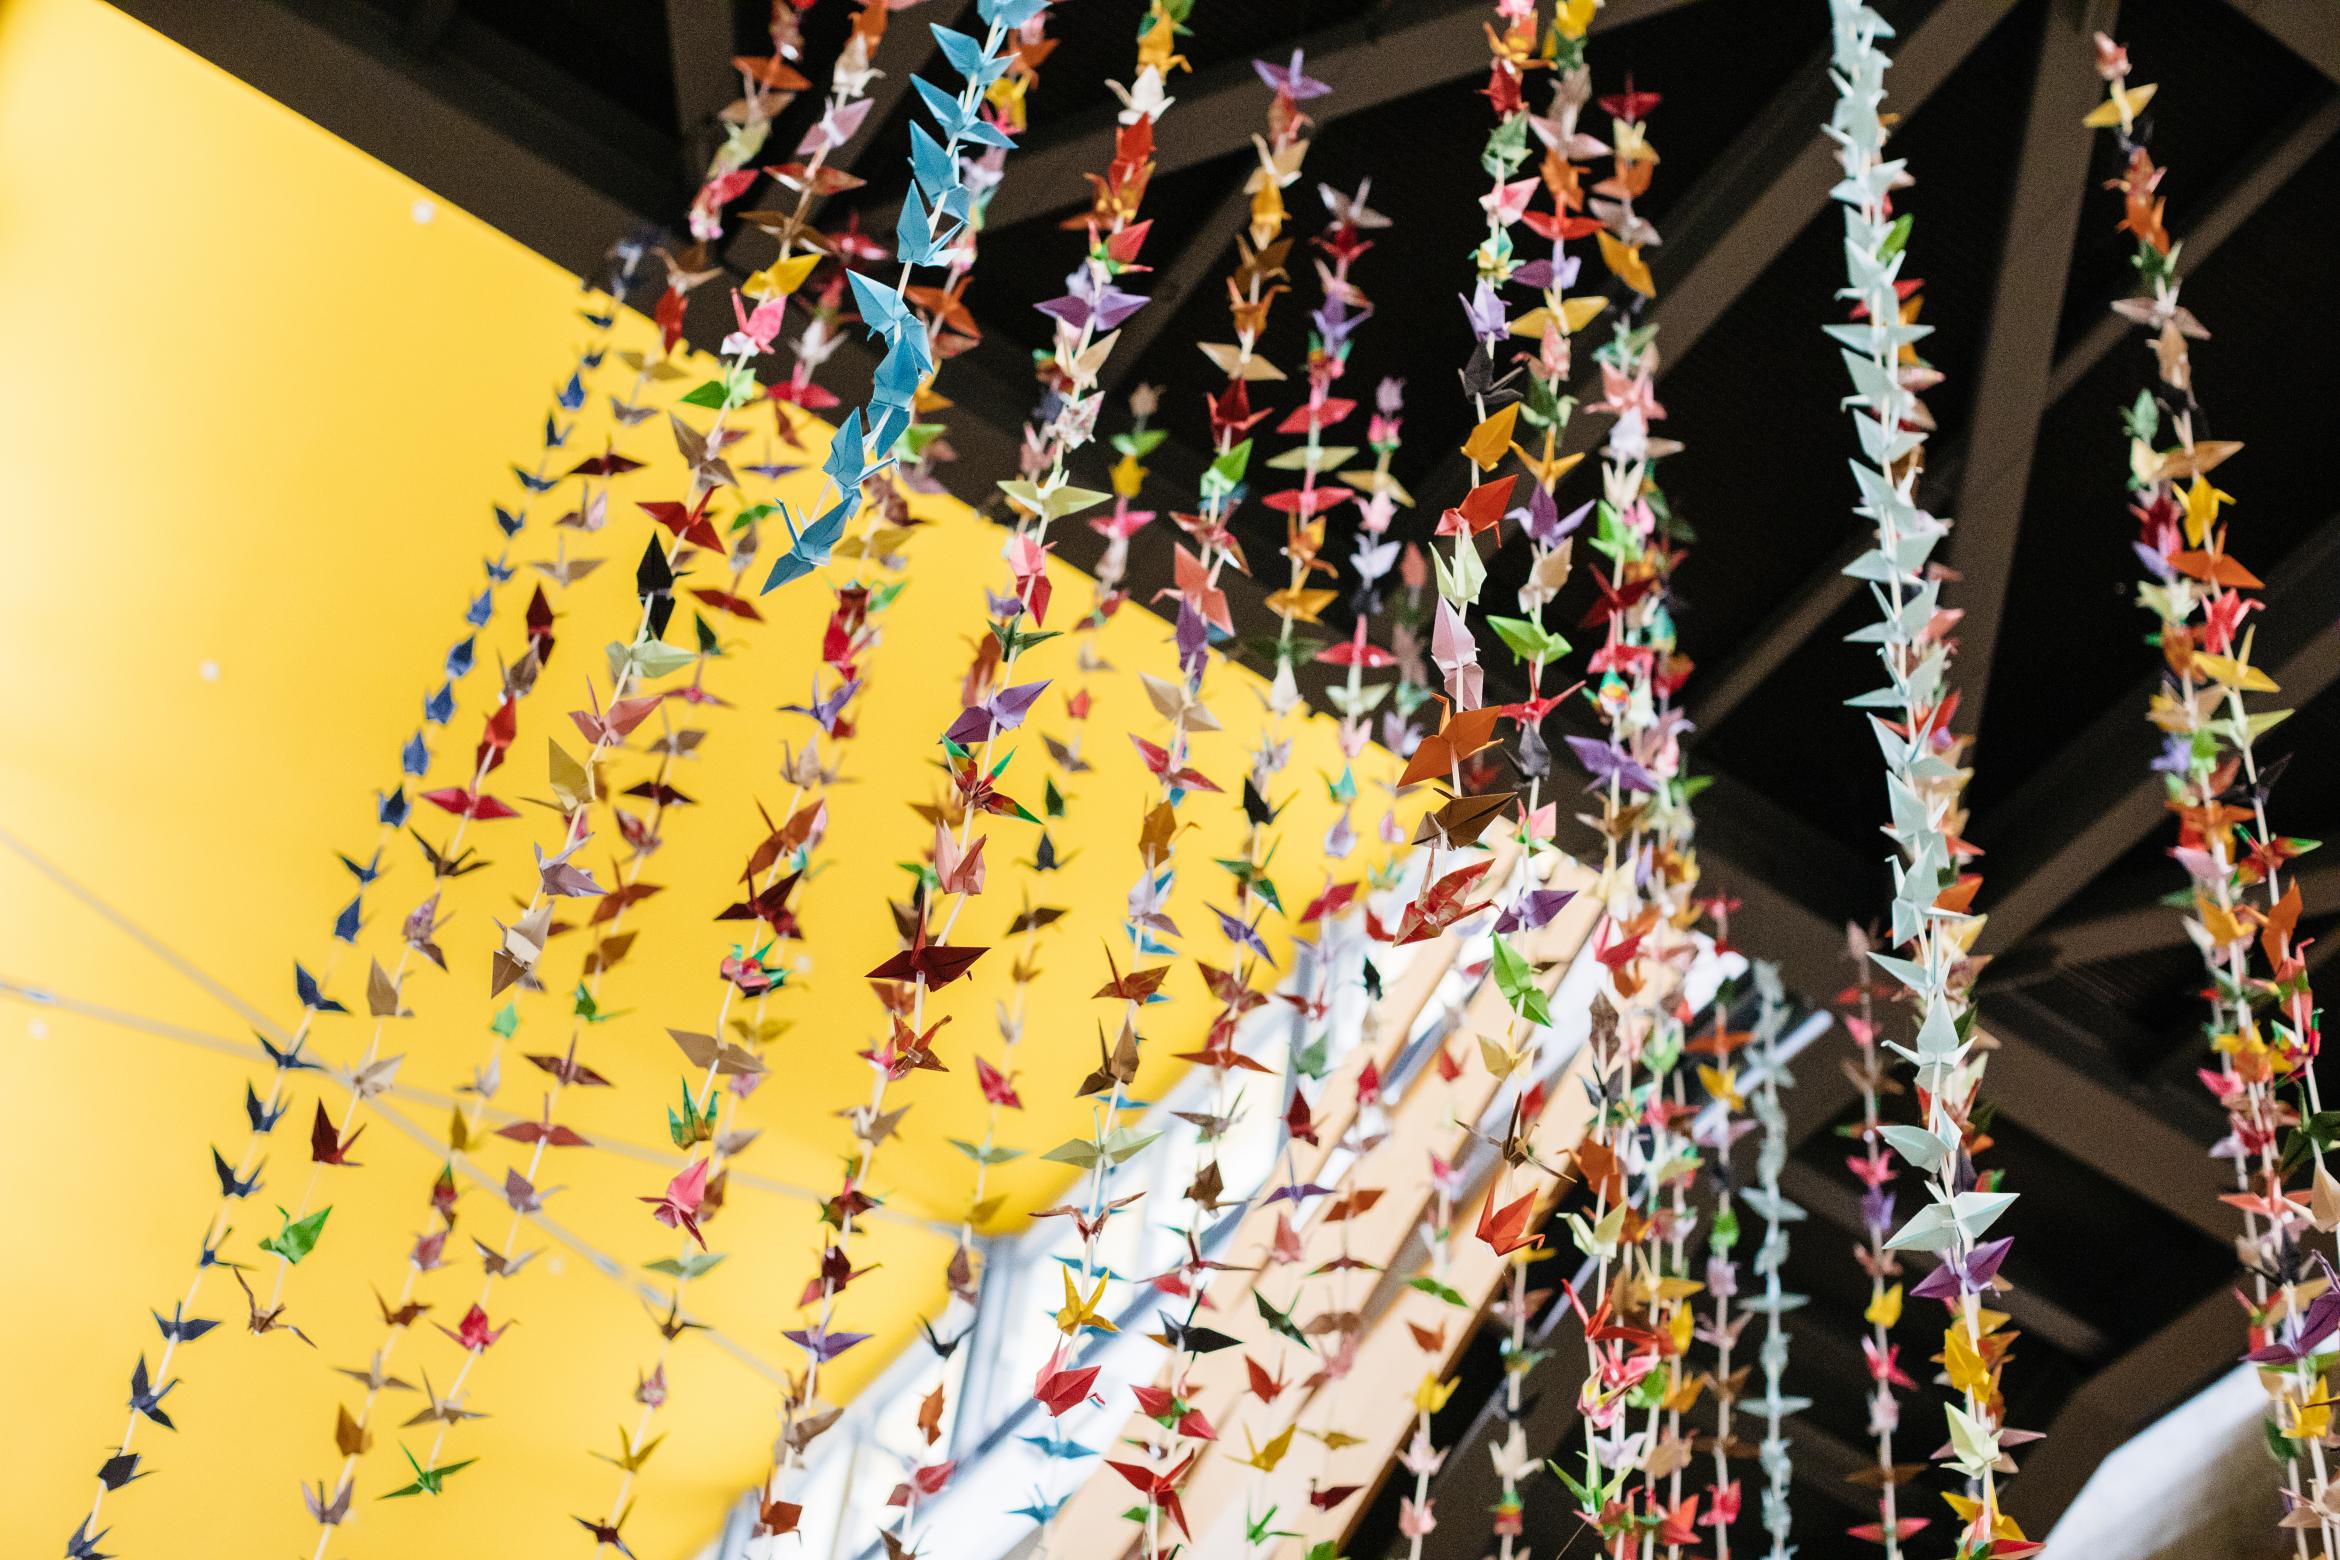 view facing upward of art installation of origami cranes of various colors hung from ceiling